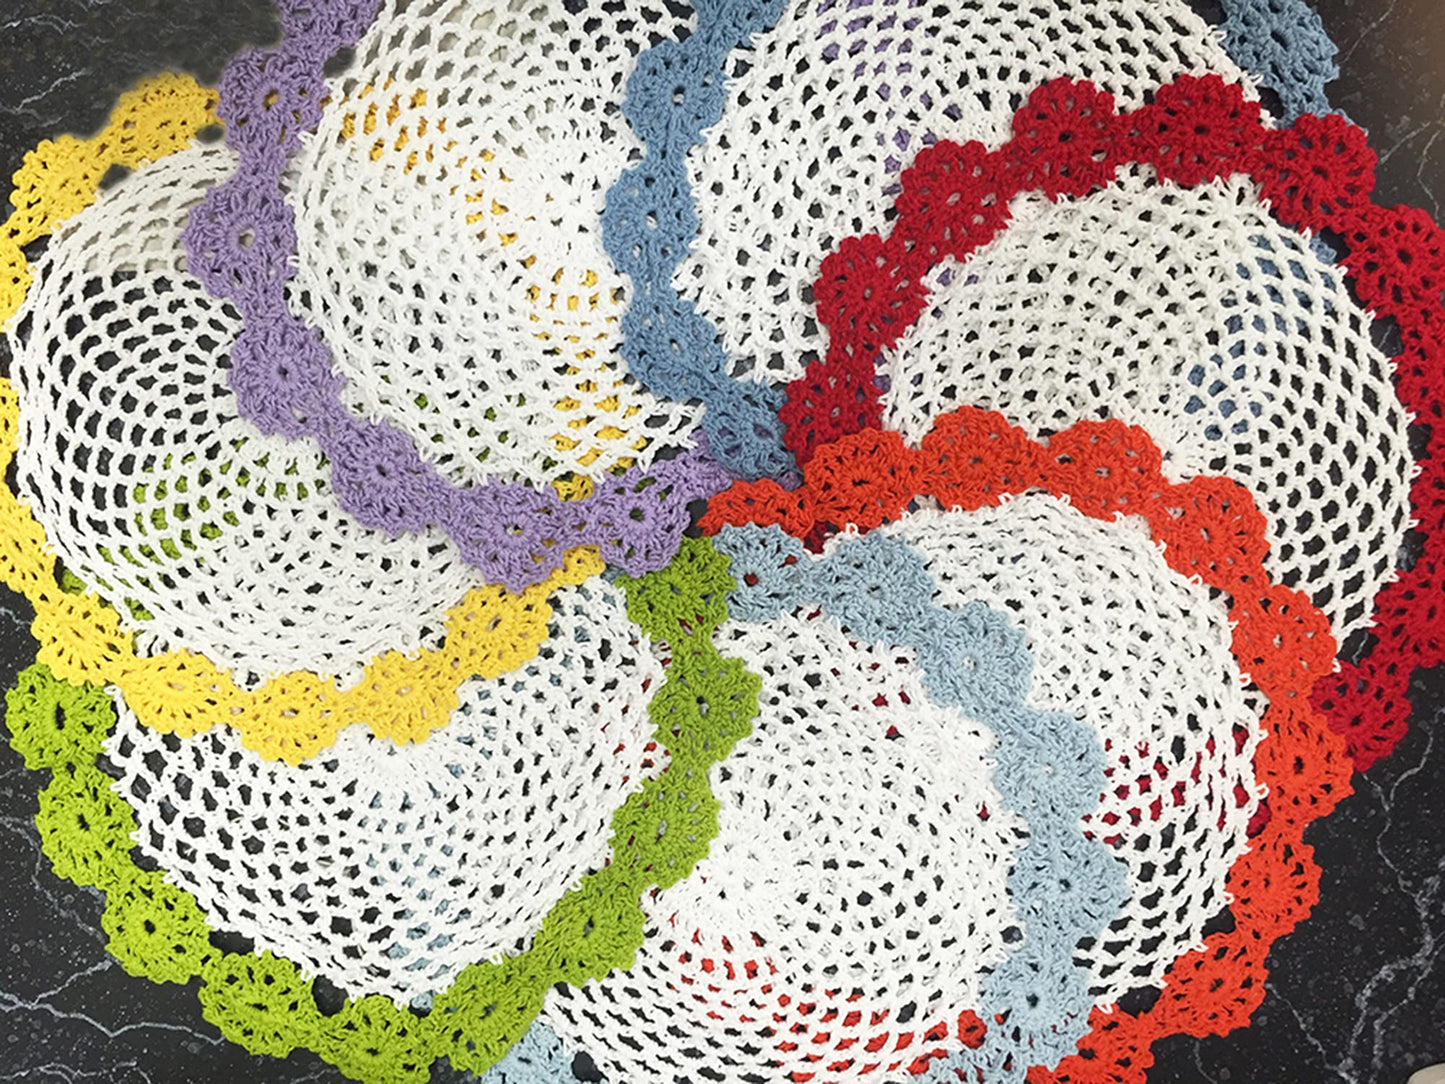 Fennco Styles Handmade Two-Tone Floral Crochet Tray Doily, 9" Round - Cloth Placemat for Everyday Use, Holidays, Home Décor, Cocktail Party, Tea Party, Special Occasion